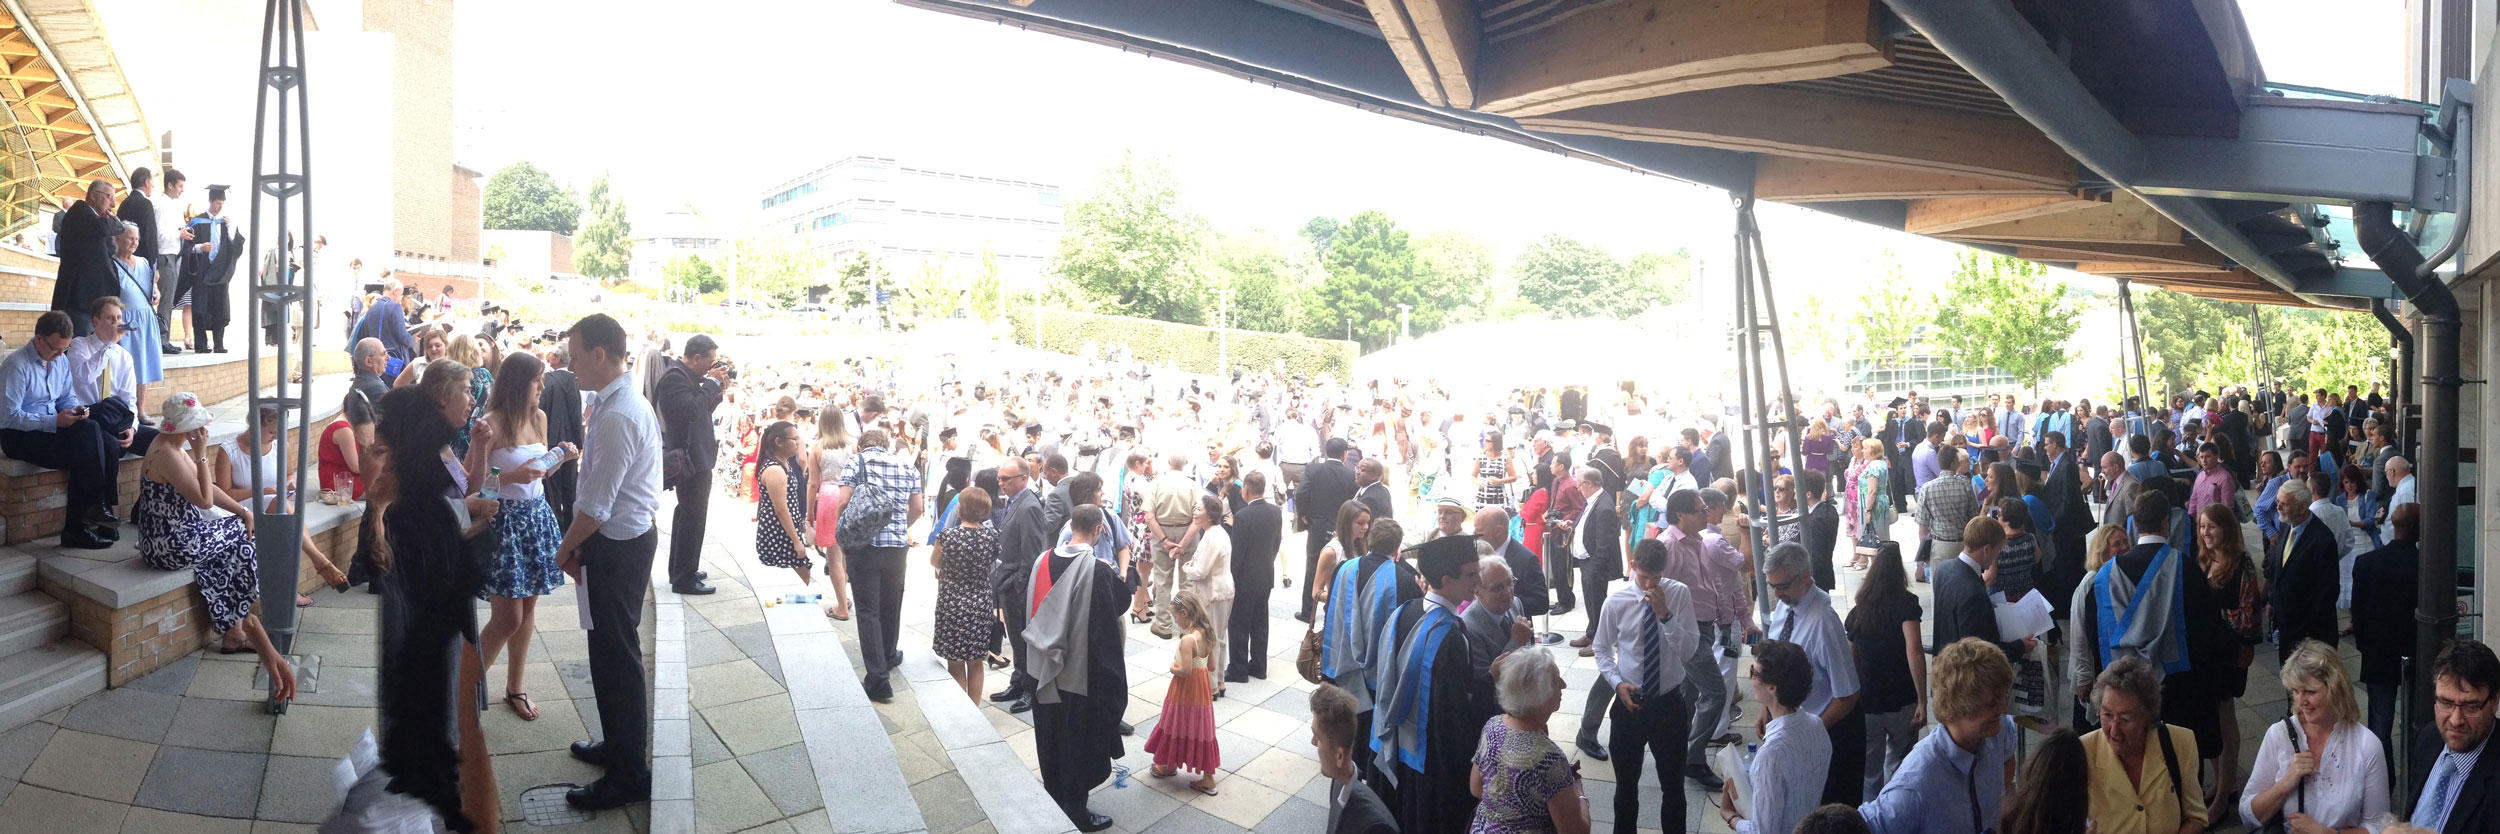 large crowd of students and families gather outside university on graduation day